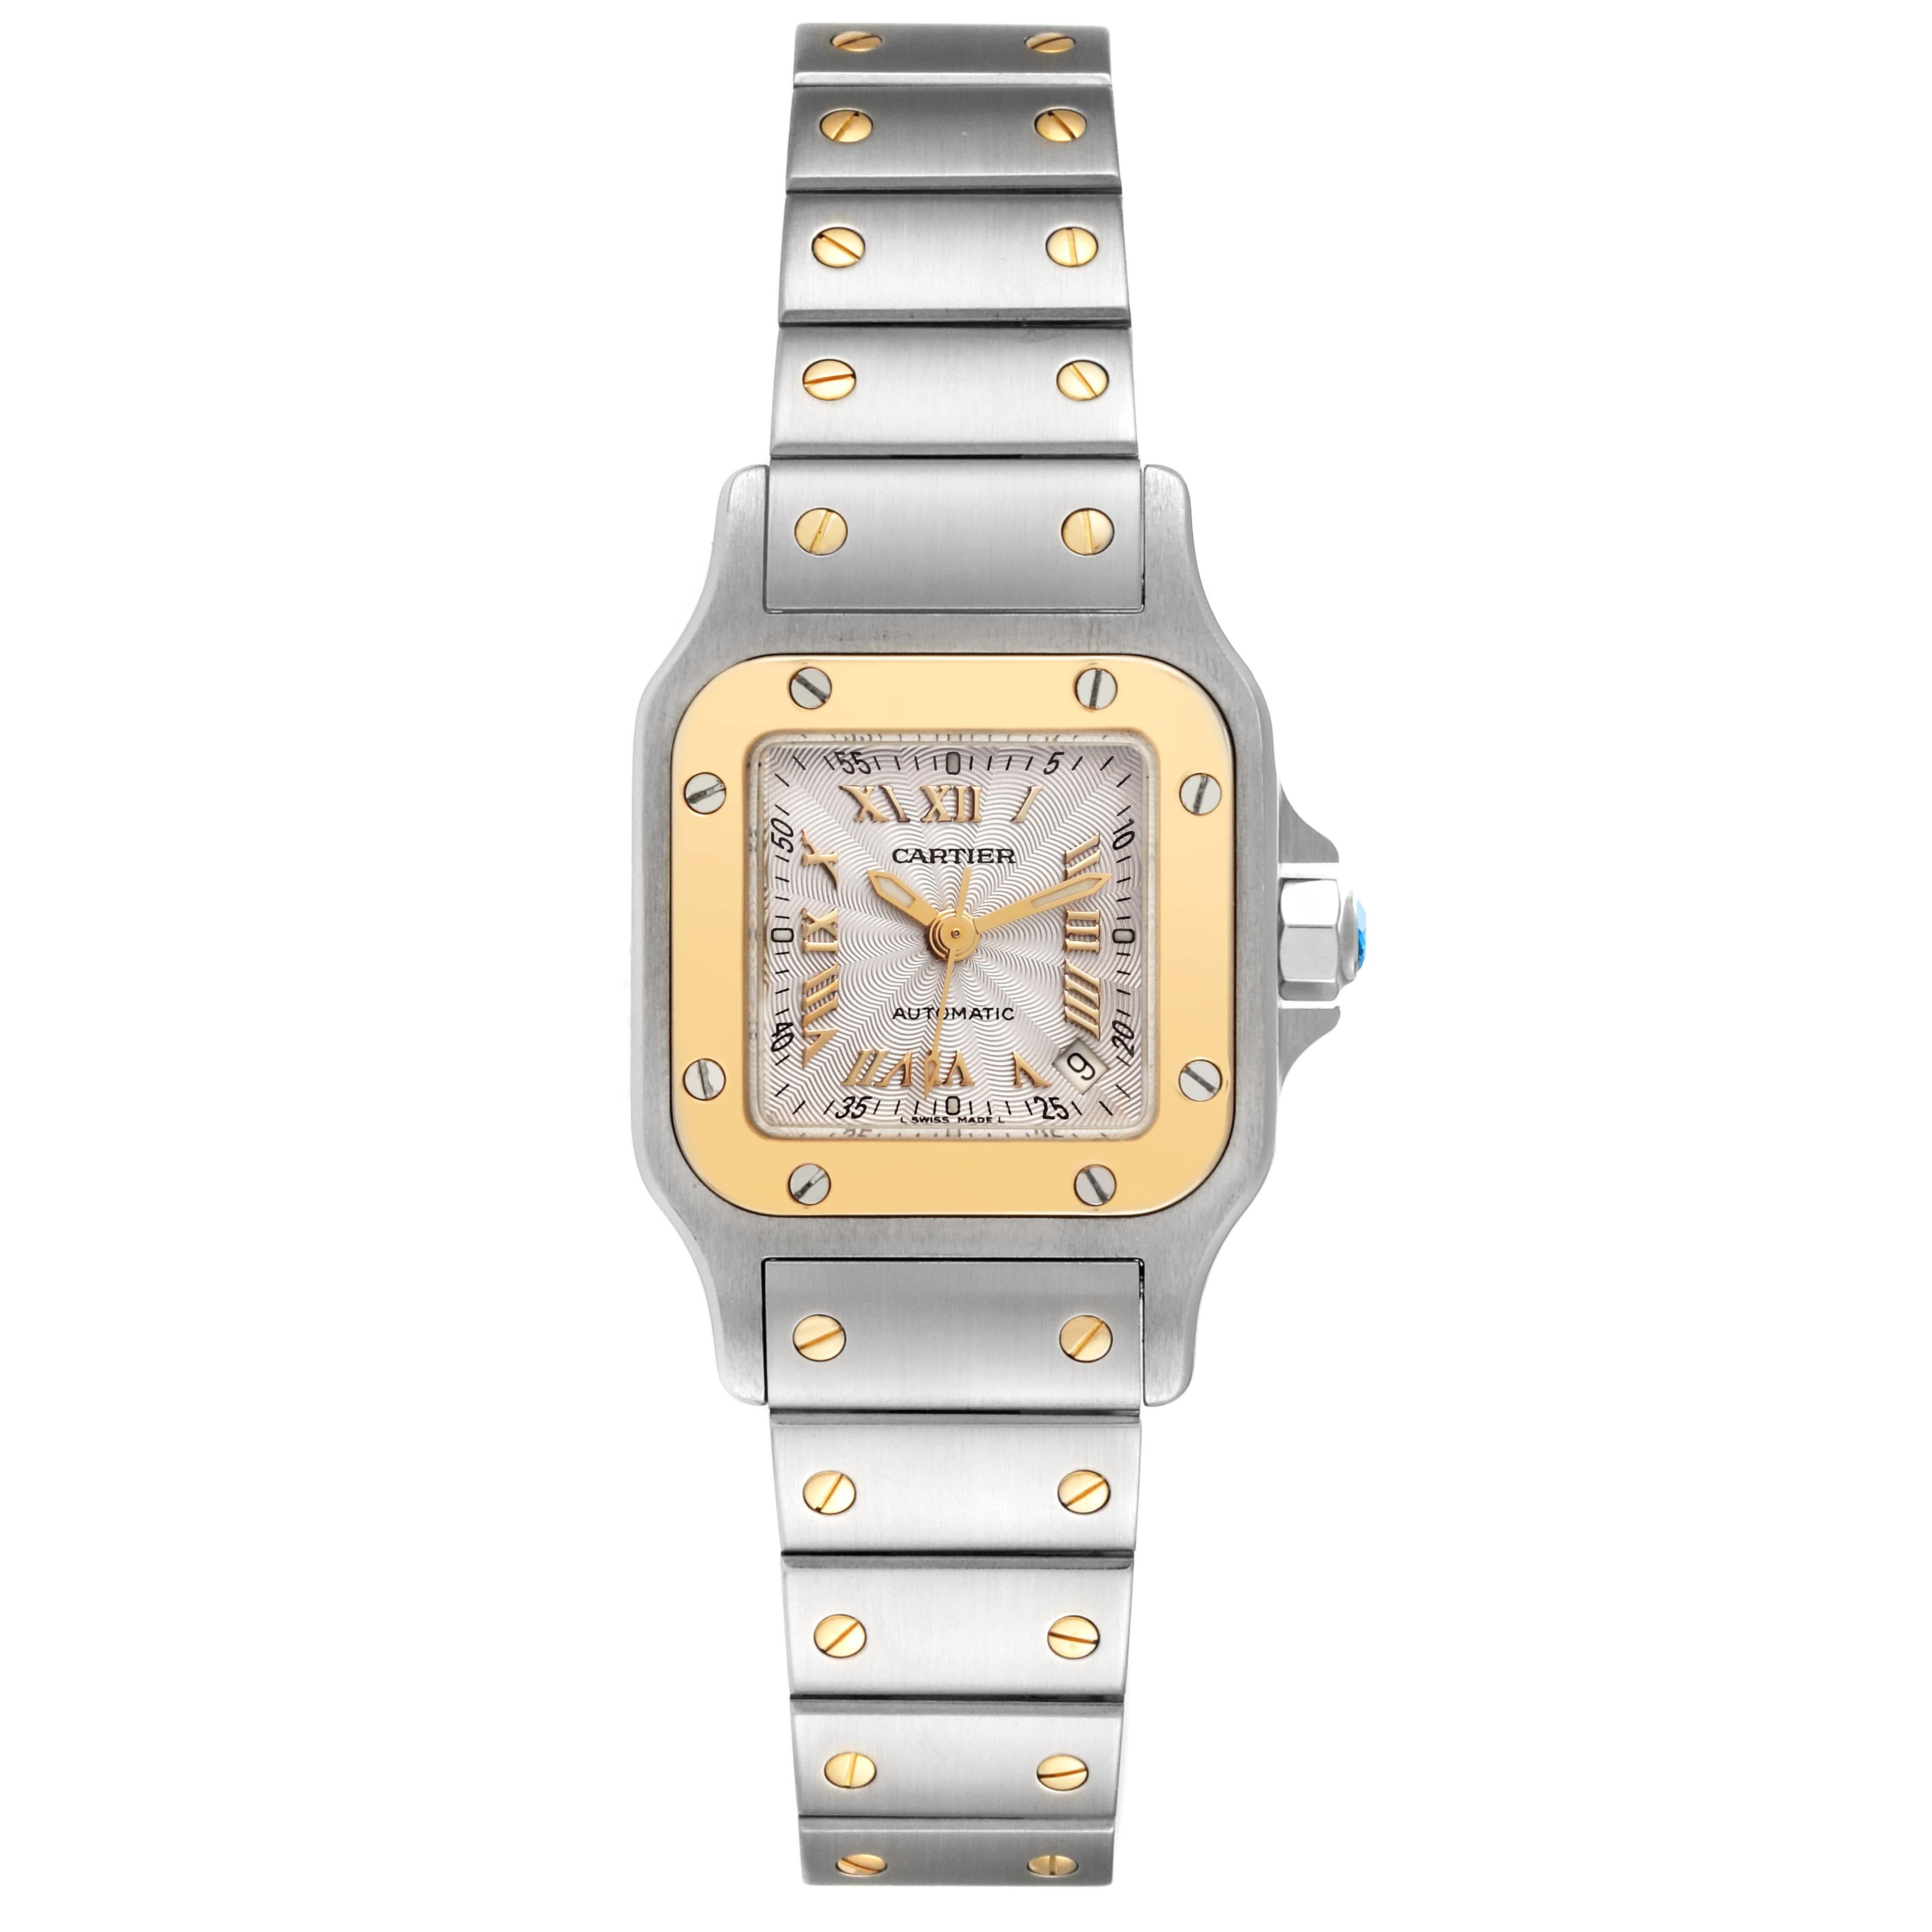 Cartier Santos Small Steel Yellow Gold Automatic Ladies Watch W20057C4. Automatic self-winding movement. Stainless steel case 24.0 x 24.0 mm. Steel octagonal crown set with the blue faceted spinel. 18K yellow gold bezel punctuated with 8 signature